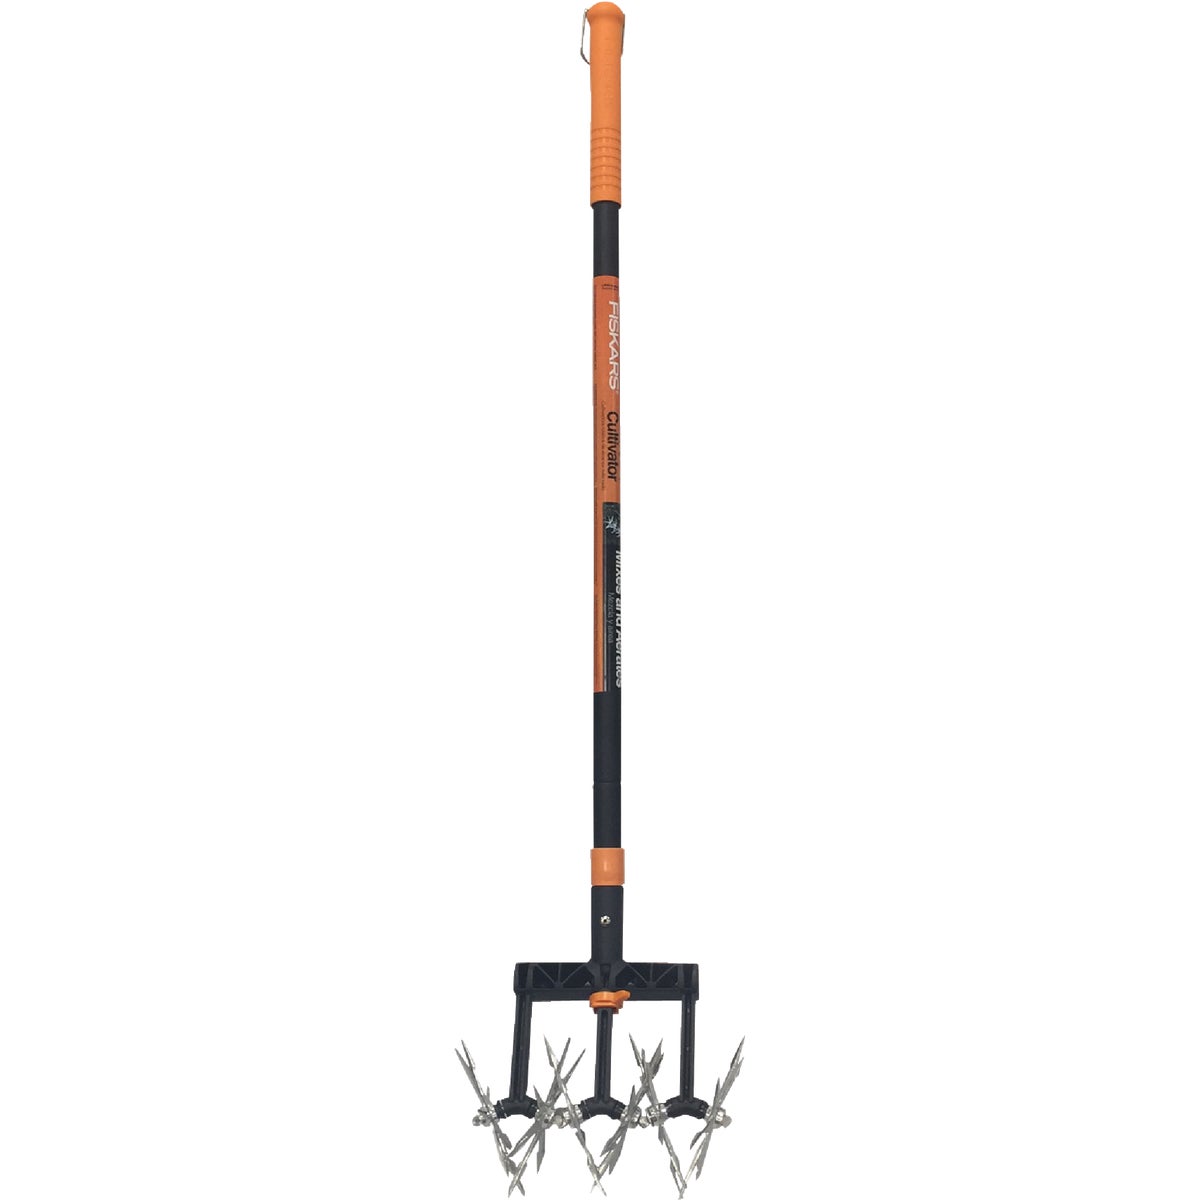 Item 700828, Extendable rotary cultivator has 6 rust-proof aluminum cultivating wheels 